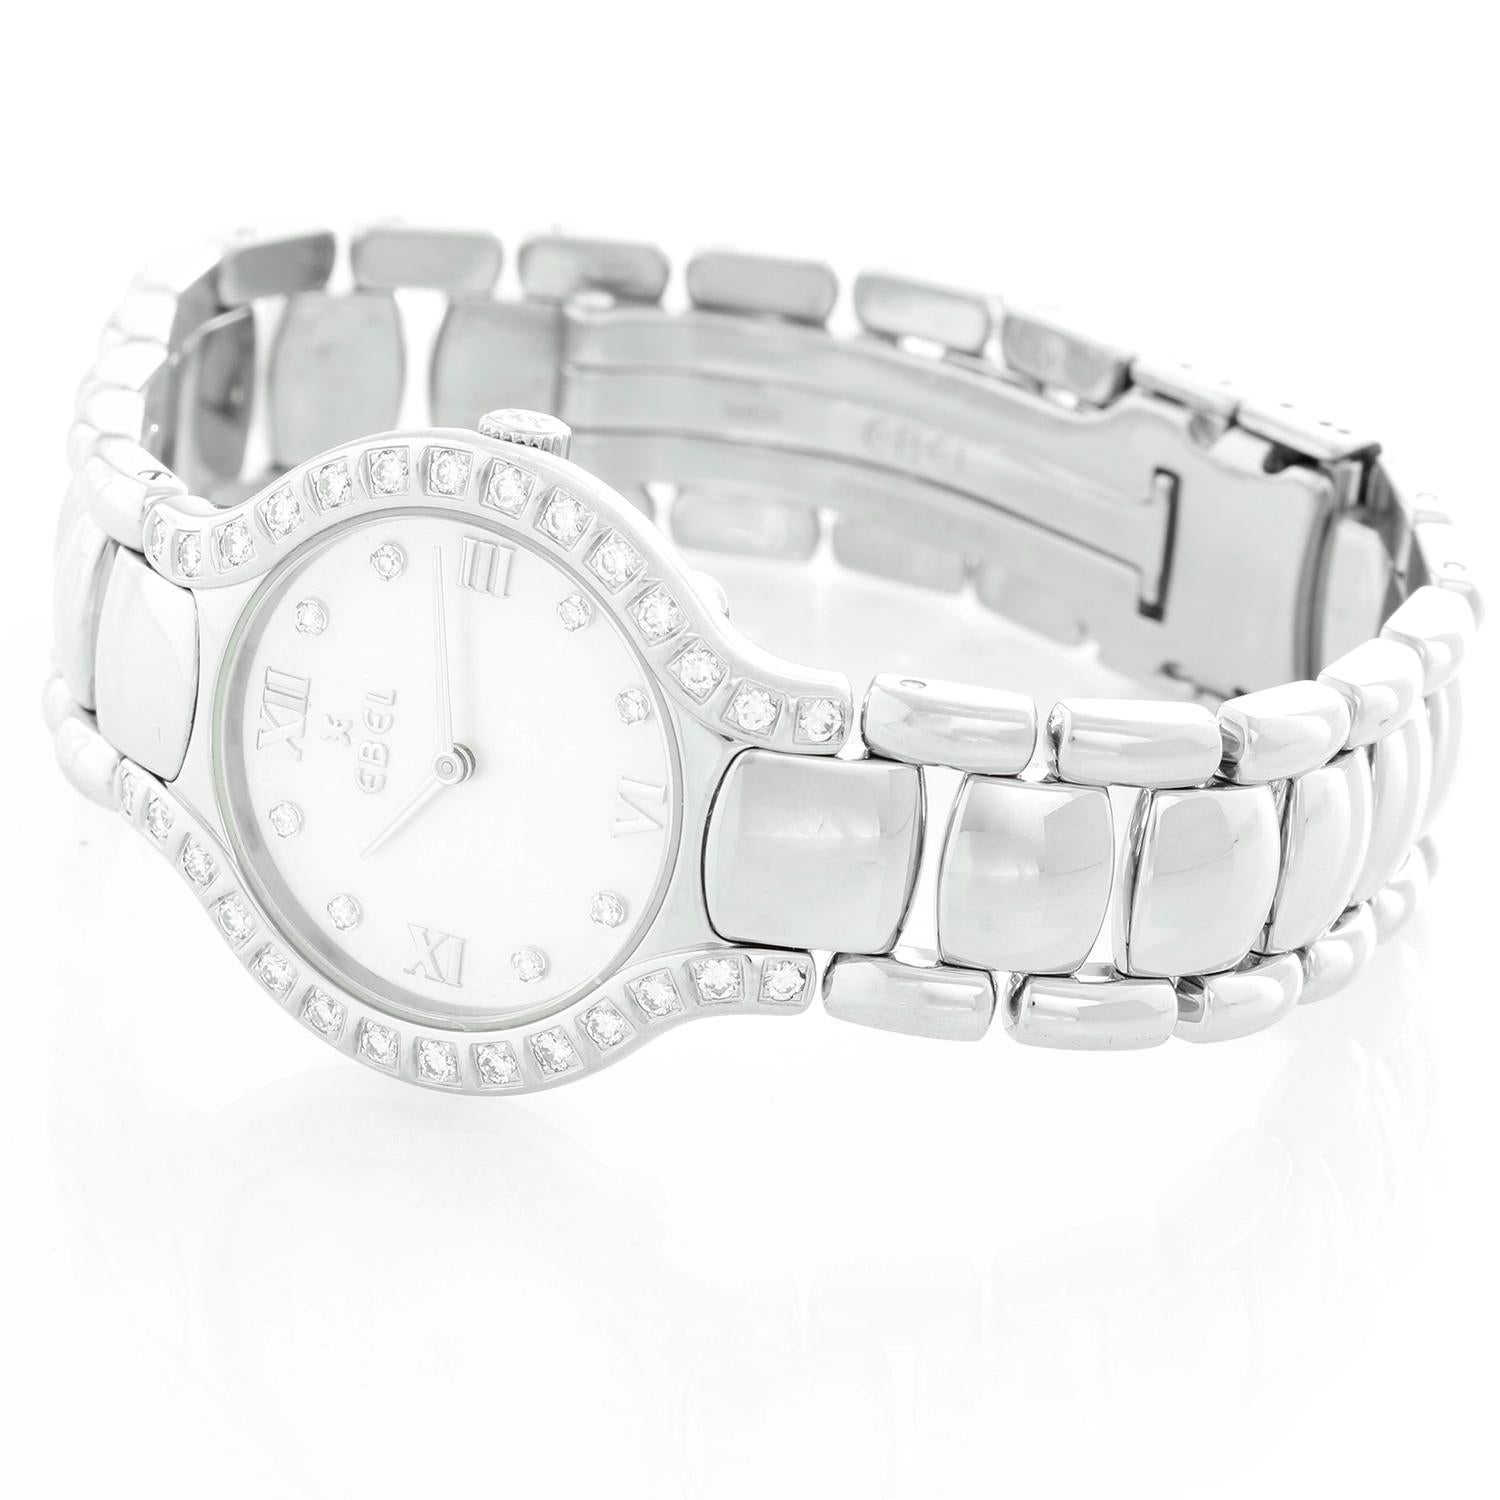 Ebel Beluga Mother of Pearl Diamond Dial Steel Ladies Watch  9157428-20 - Quartz. Stainless steel case with diamonds (27mm diameter). Silver mother of pearl dial with 8 diamond hour markers. Stainless steel Beluga bracelet; will fit a 6 1/2 inch